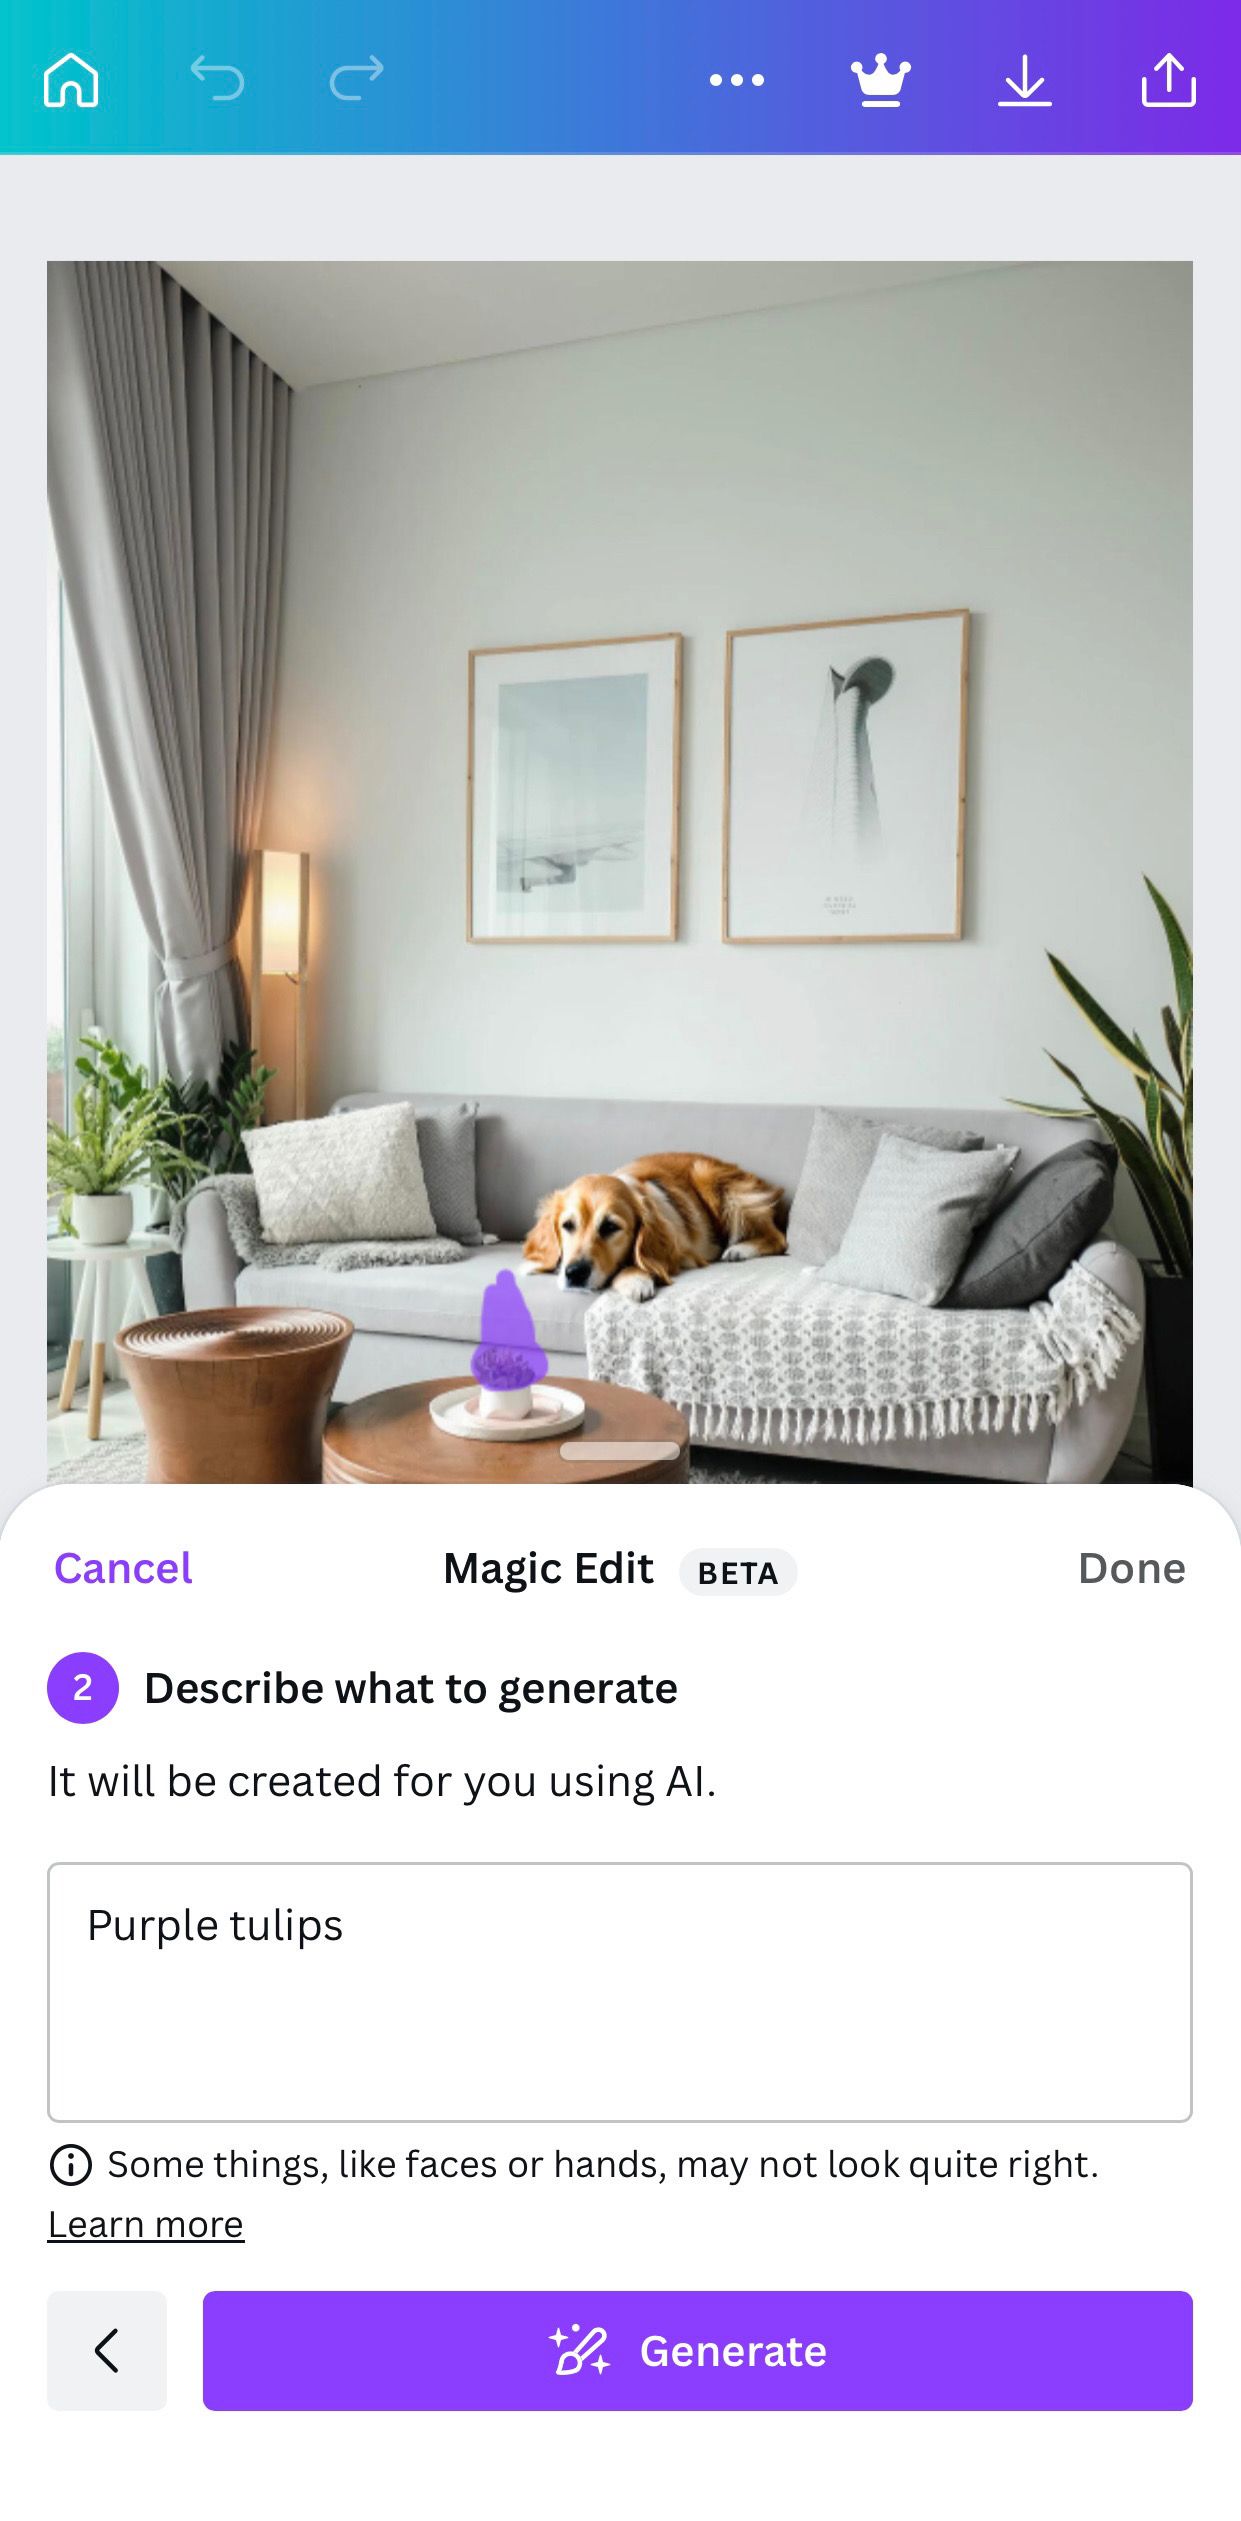 Cozy living room with golden retriever laying on couch and a text prompt for purple tulips to generate an AI replacement